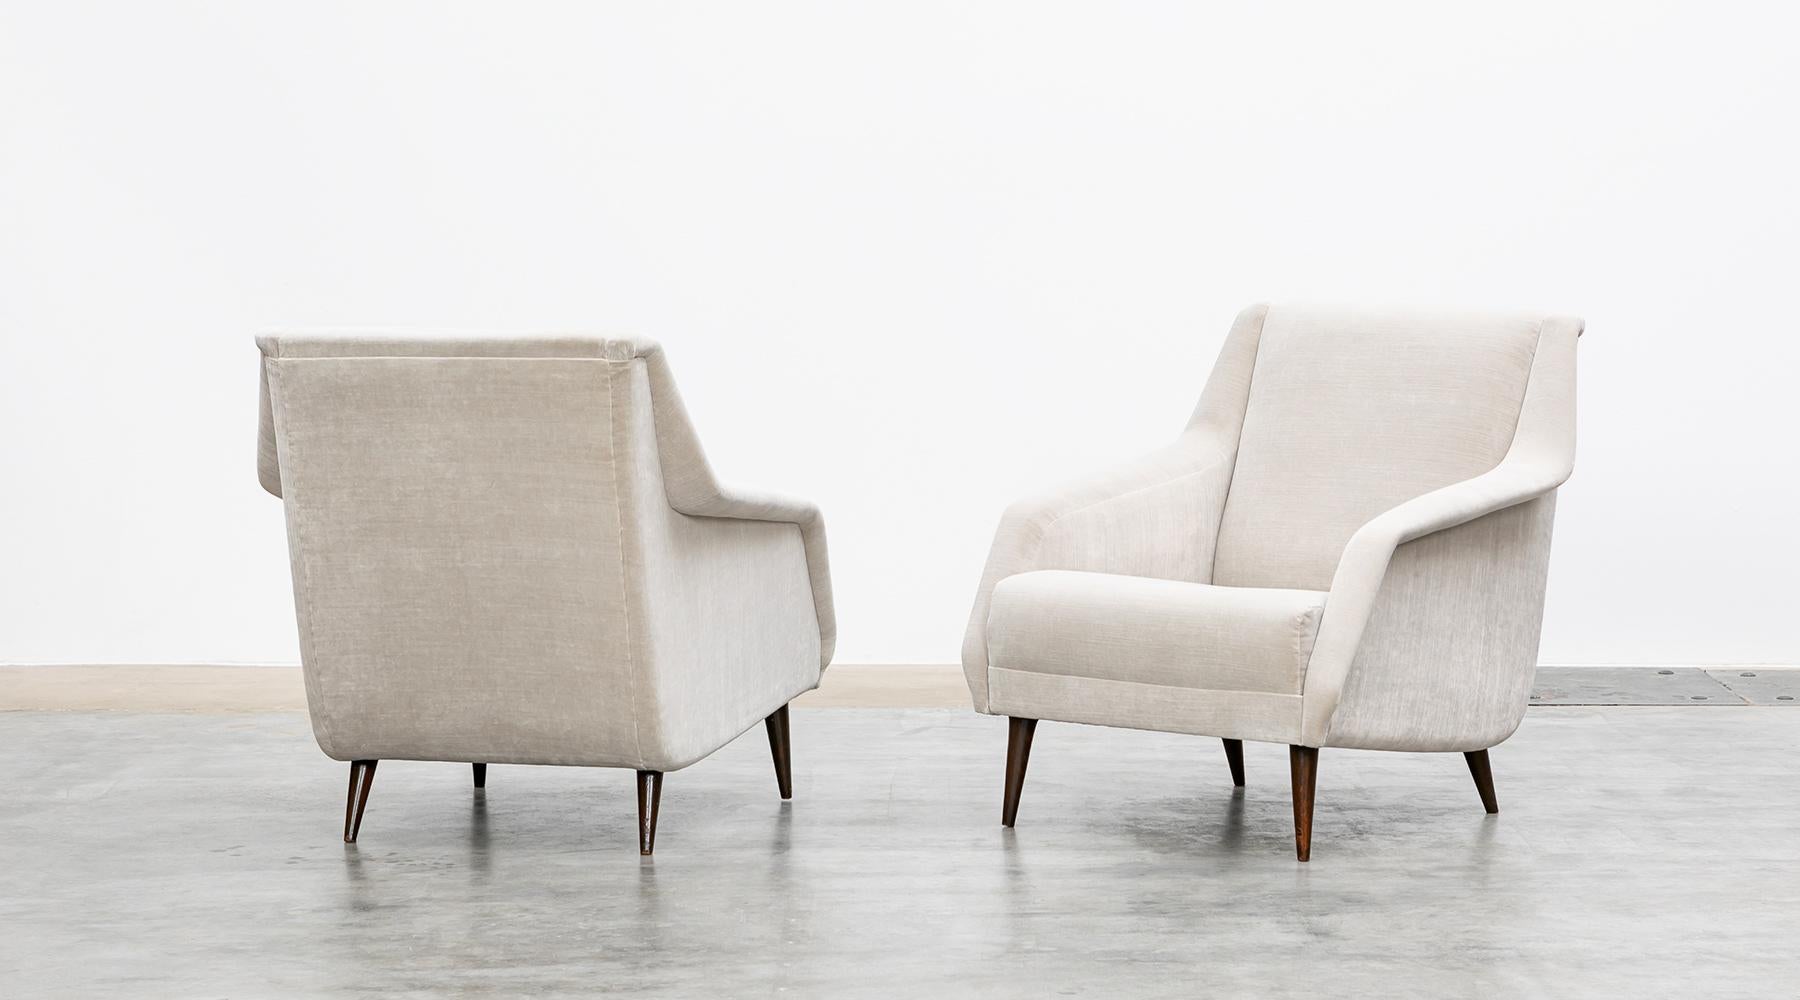 New upholstery in light grey high-quality fabric, lounge chairs by Carlo de Carli, Italy, 1954.

A pair of lounge chairs designed by Carlo de Carli. The sensual curves and elegantly tapering legs give the chairs a sculptural, modern look.